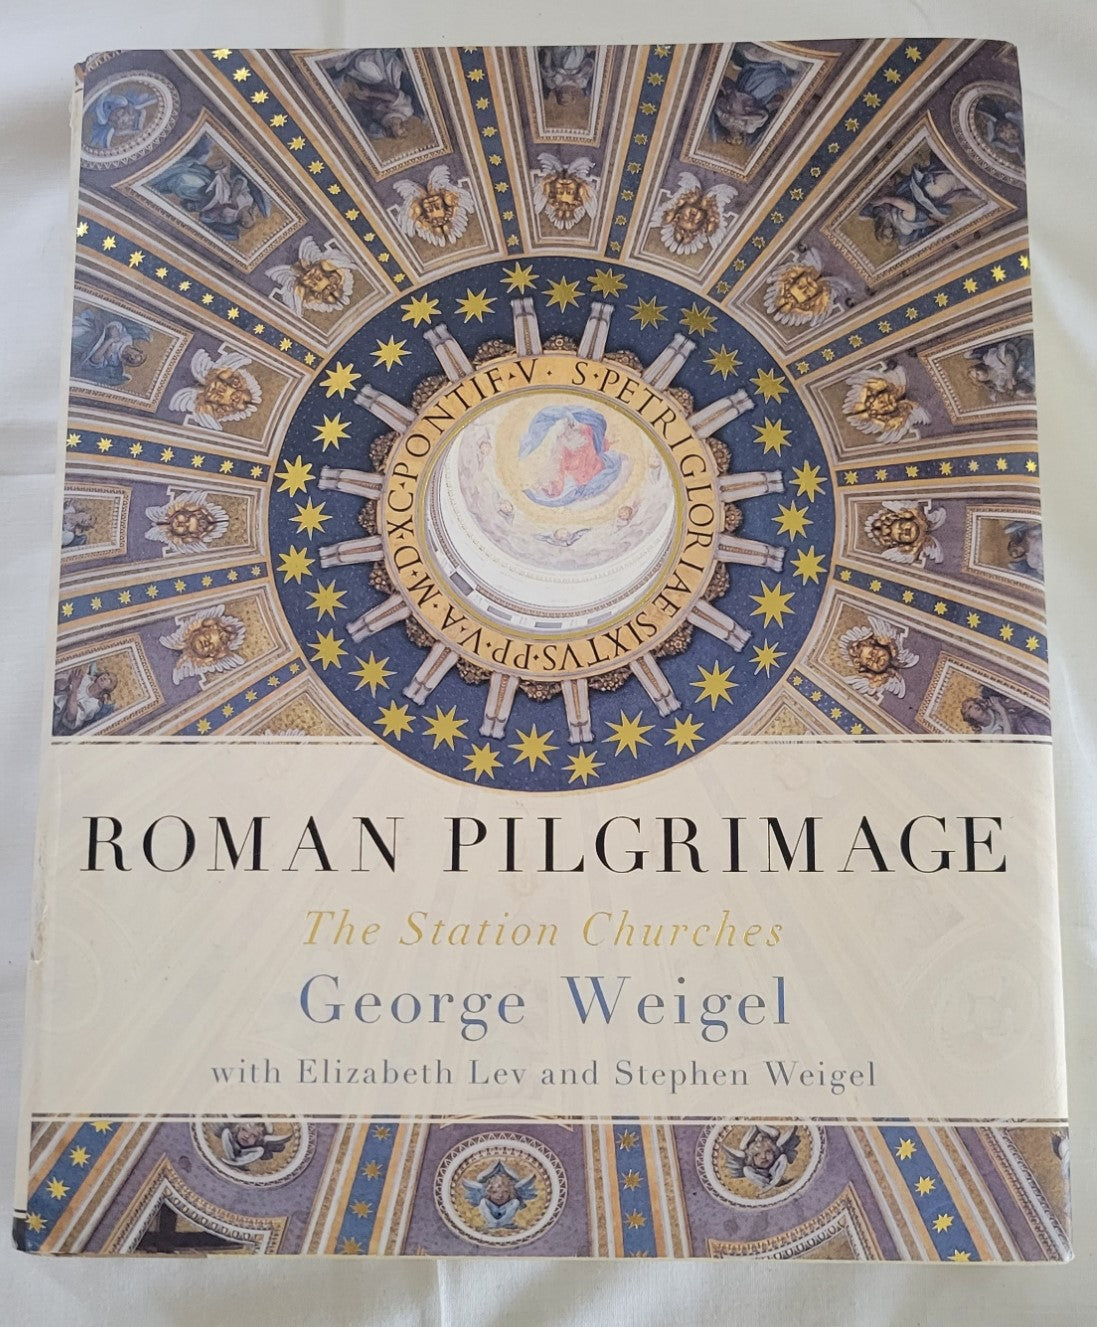 Used book for sale “Roman Pilgrimage: The Station Churches” by George Weigel with Elizabeth Lev and Stephen Weigel. View of front cover.